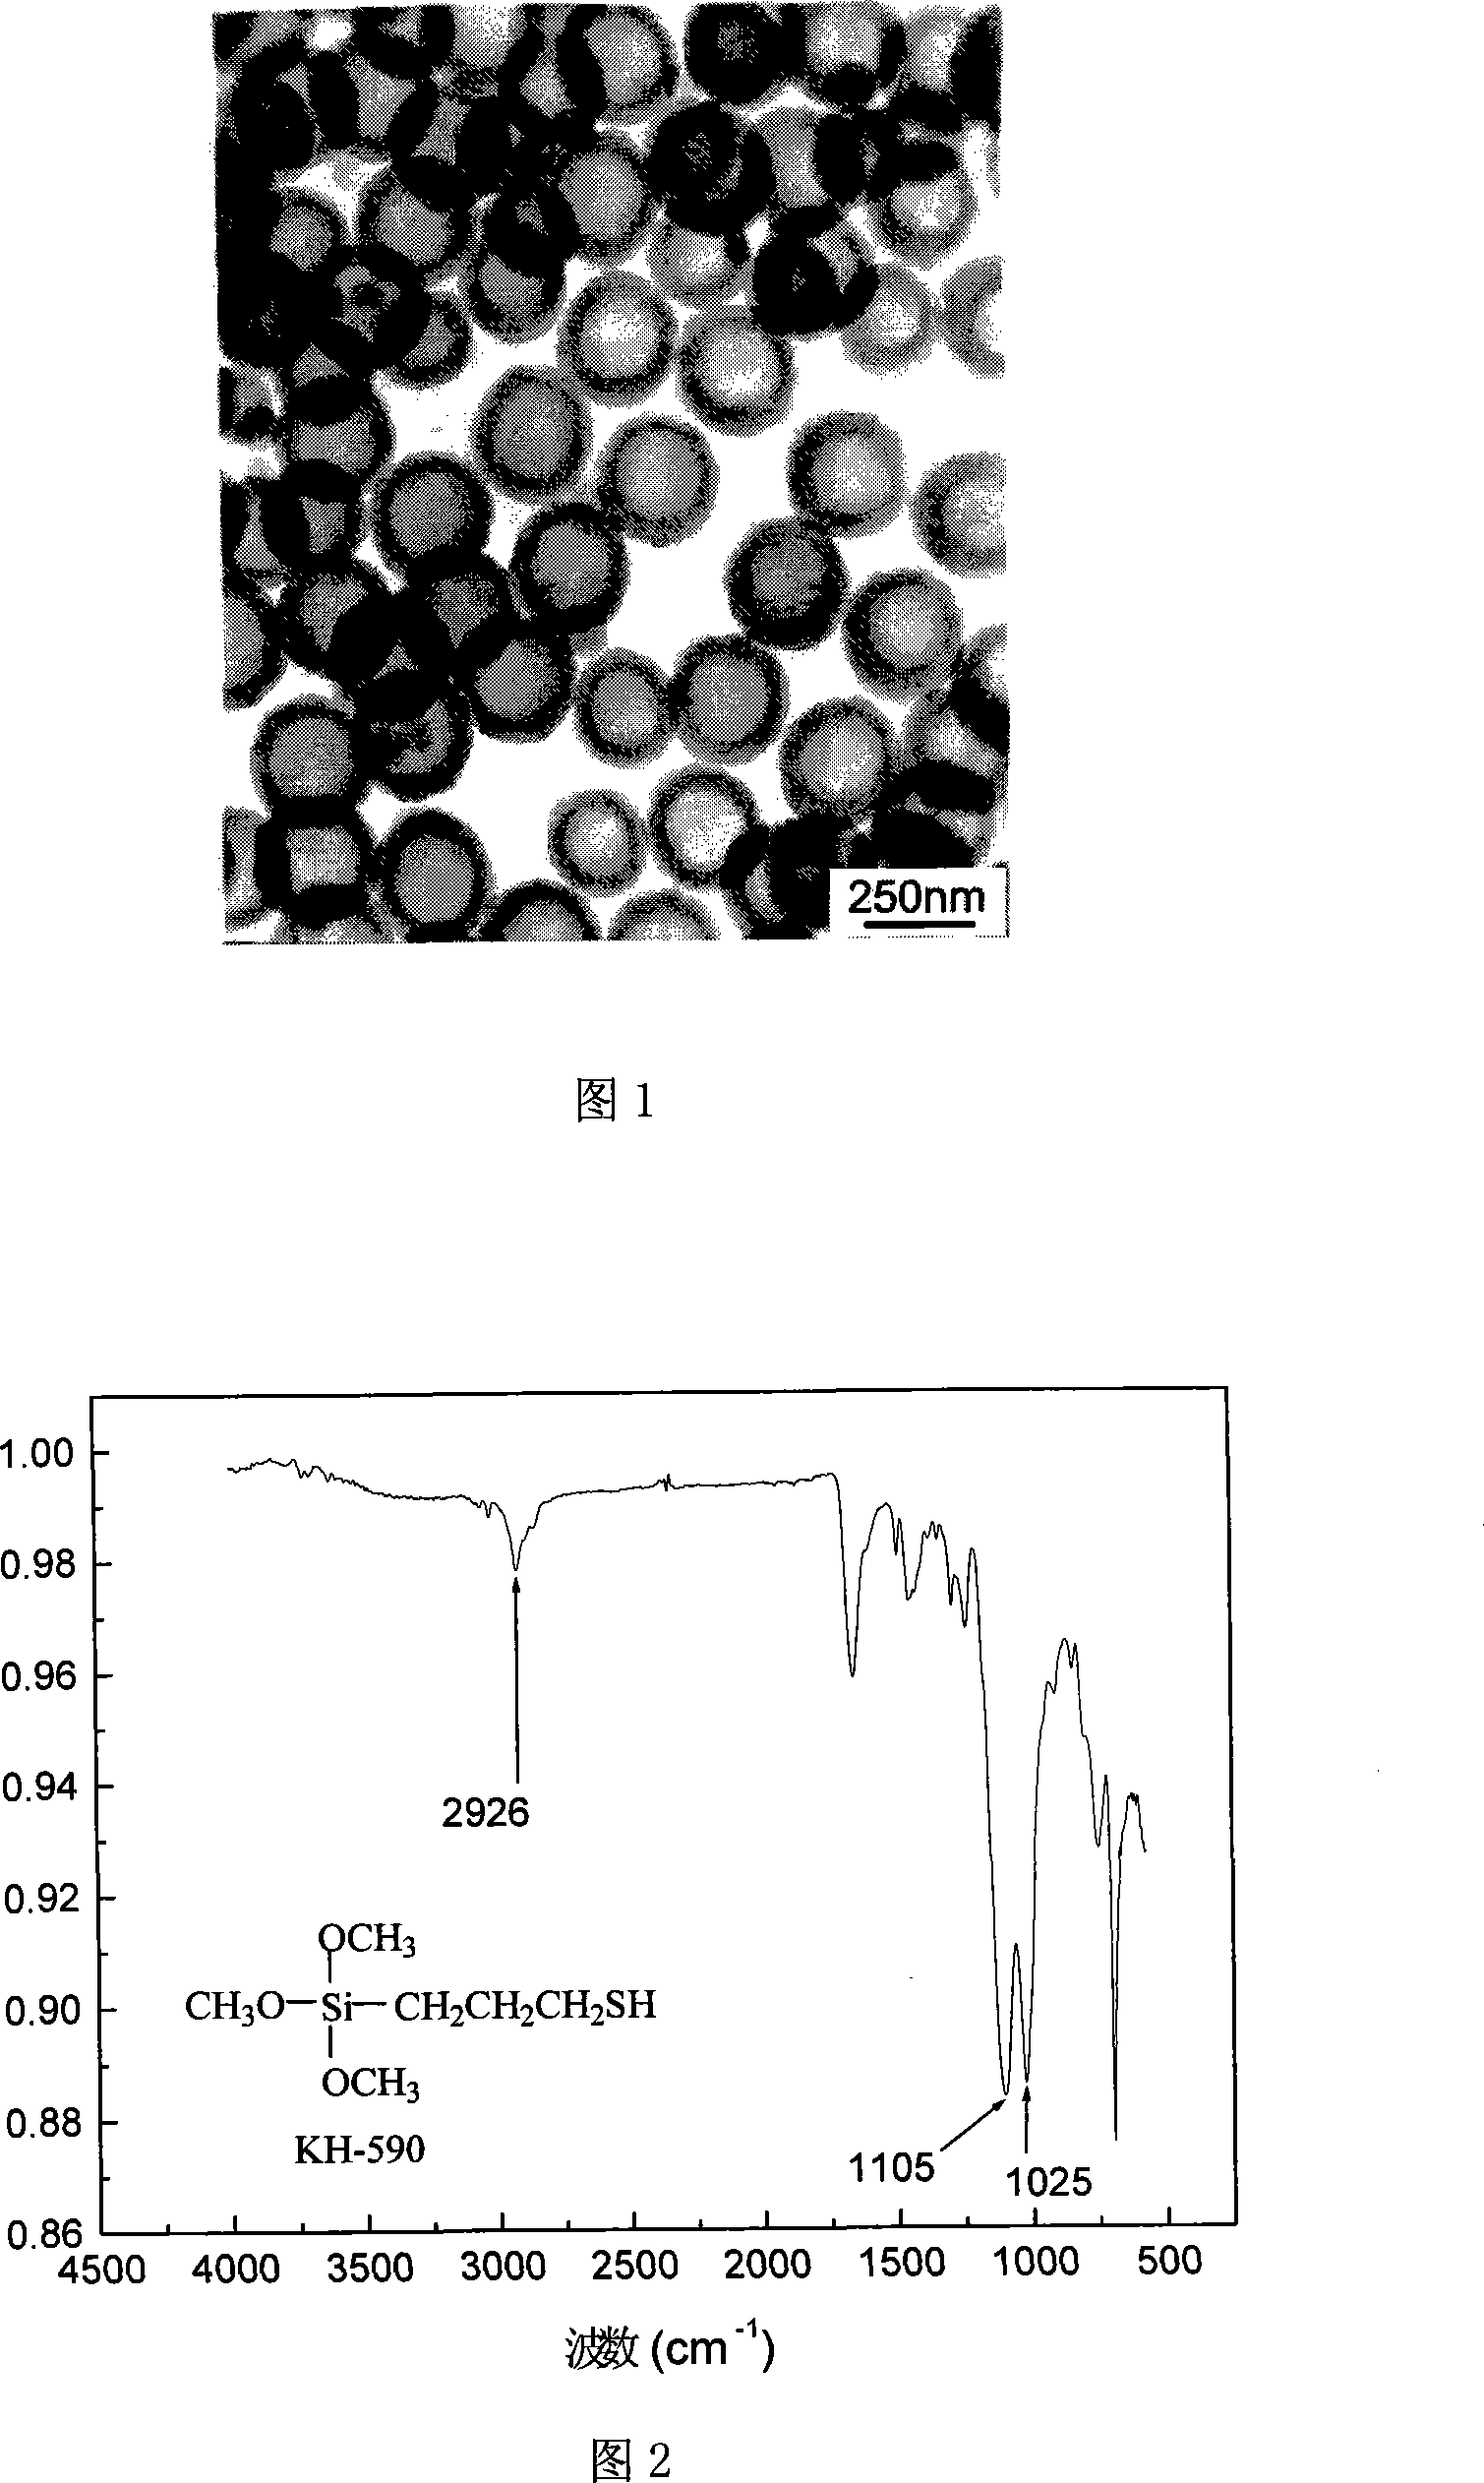 Method of producing hollow silicon dioxide microsphere with mercapto on internal and external surfaces